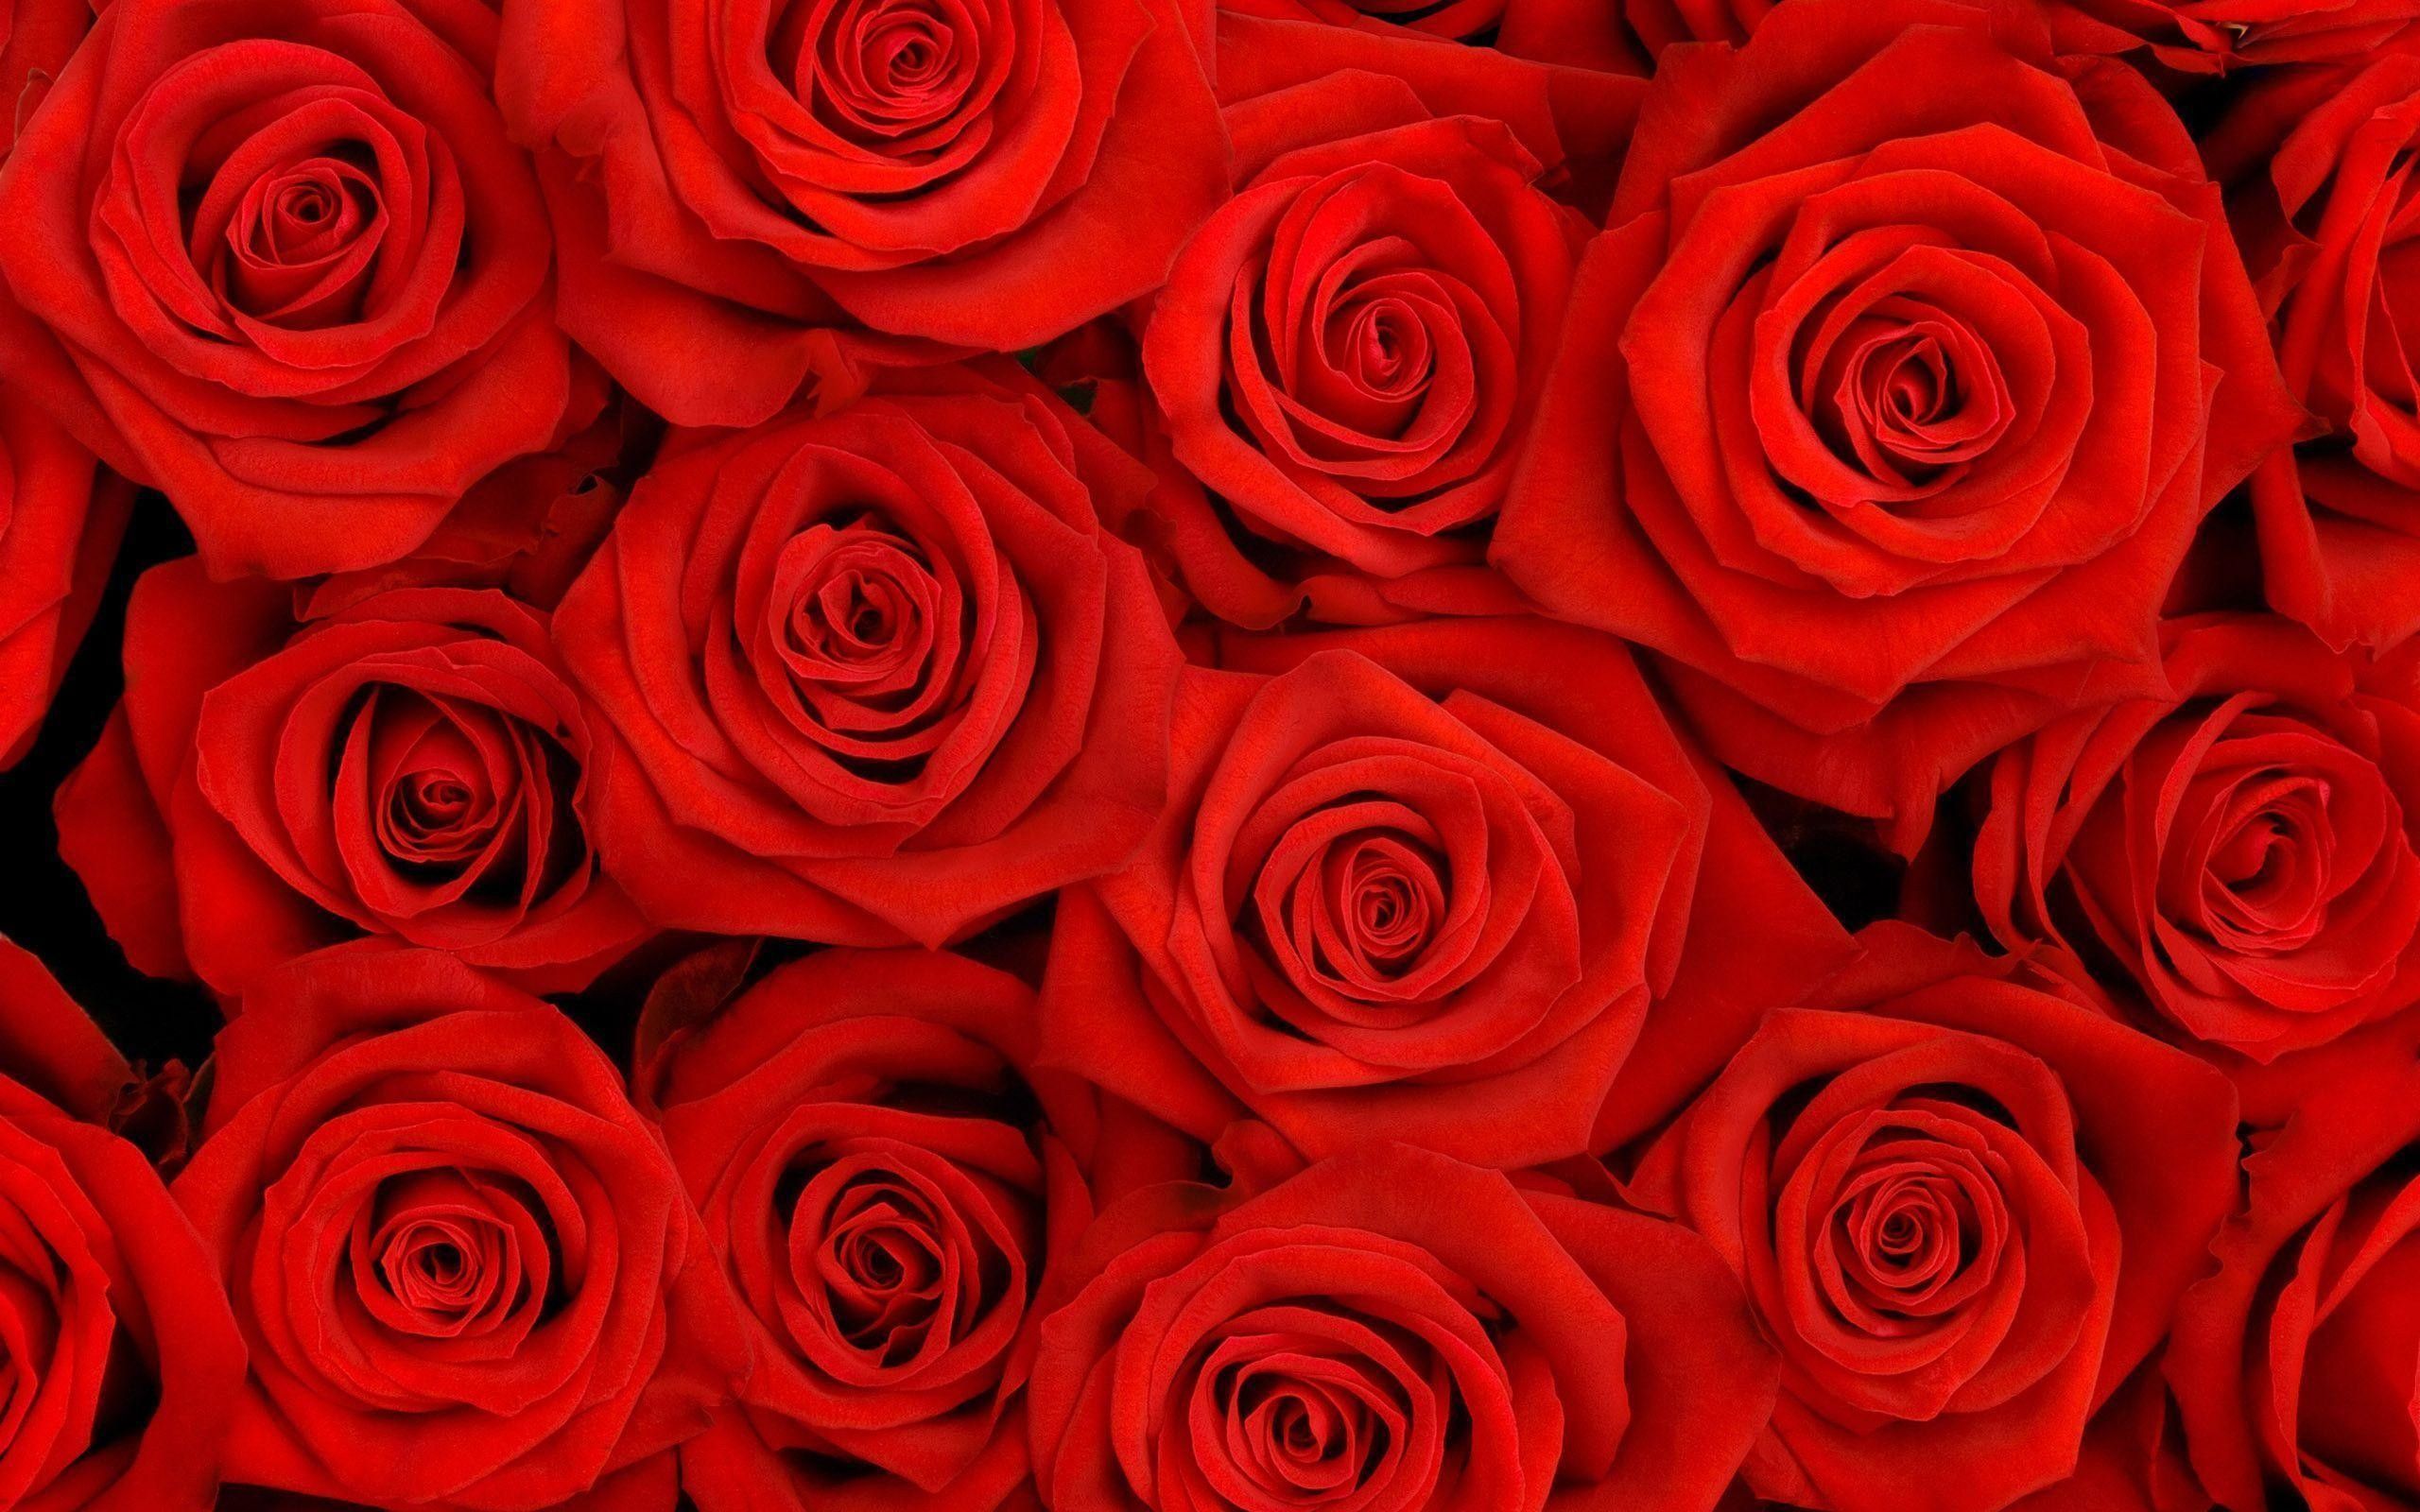 Cool Red Rose Wallpapers 4k Hd Cool Red Rose Backgrounds On Wallpaperbat